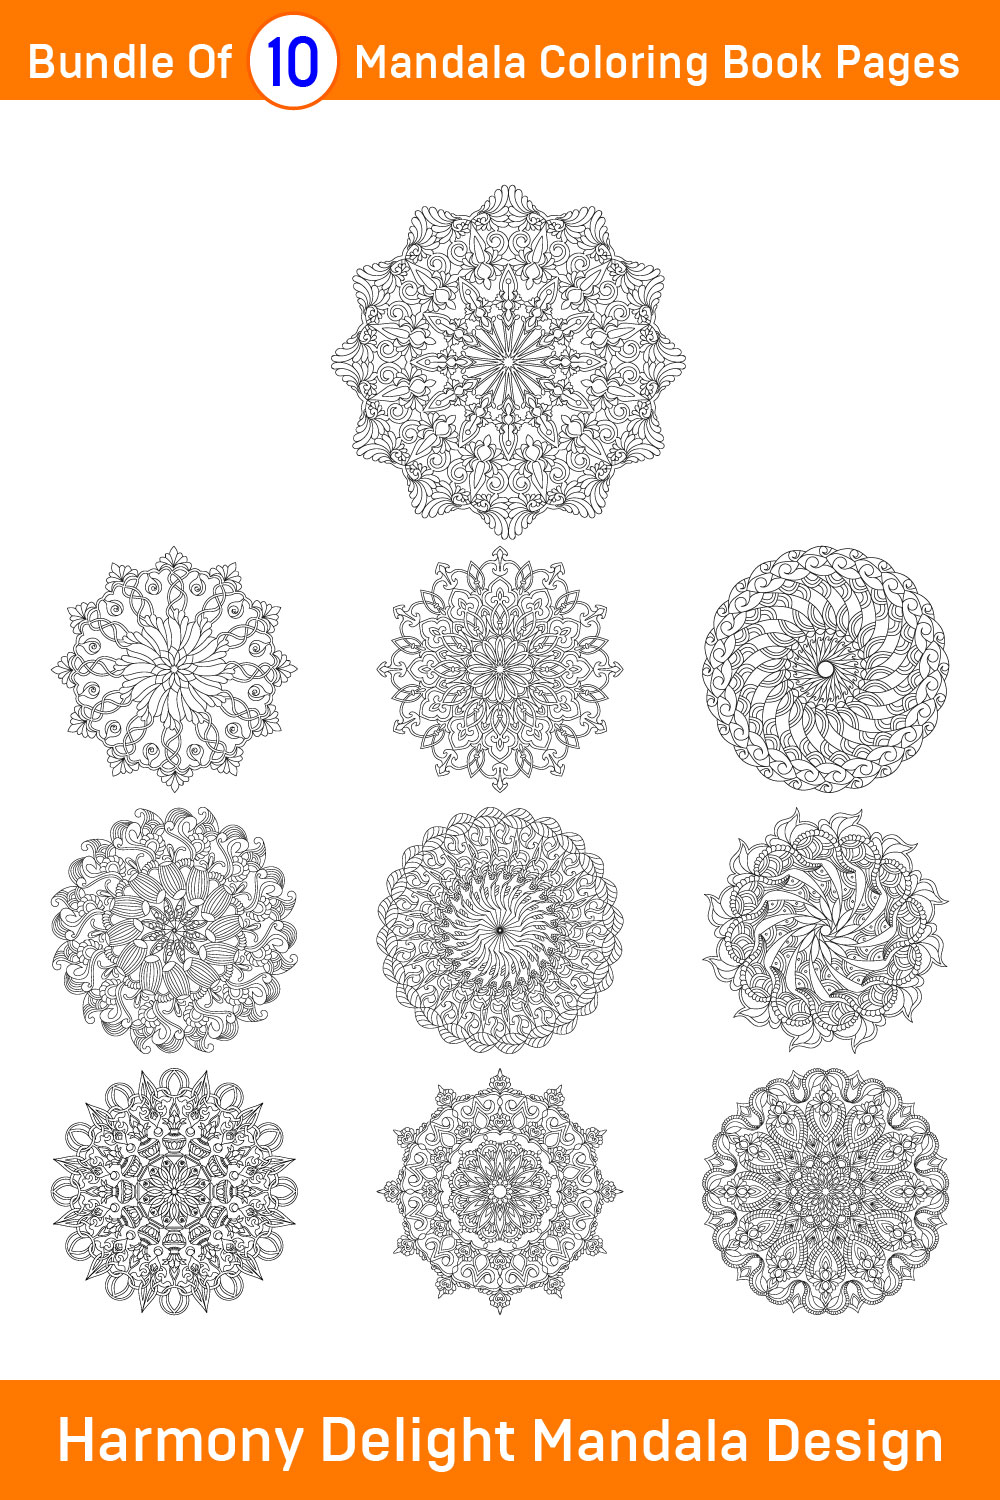 Bundle of 10 Harmony Delight Mandala Coloring Book Pages pinterest preview image.